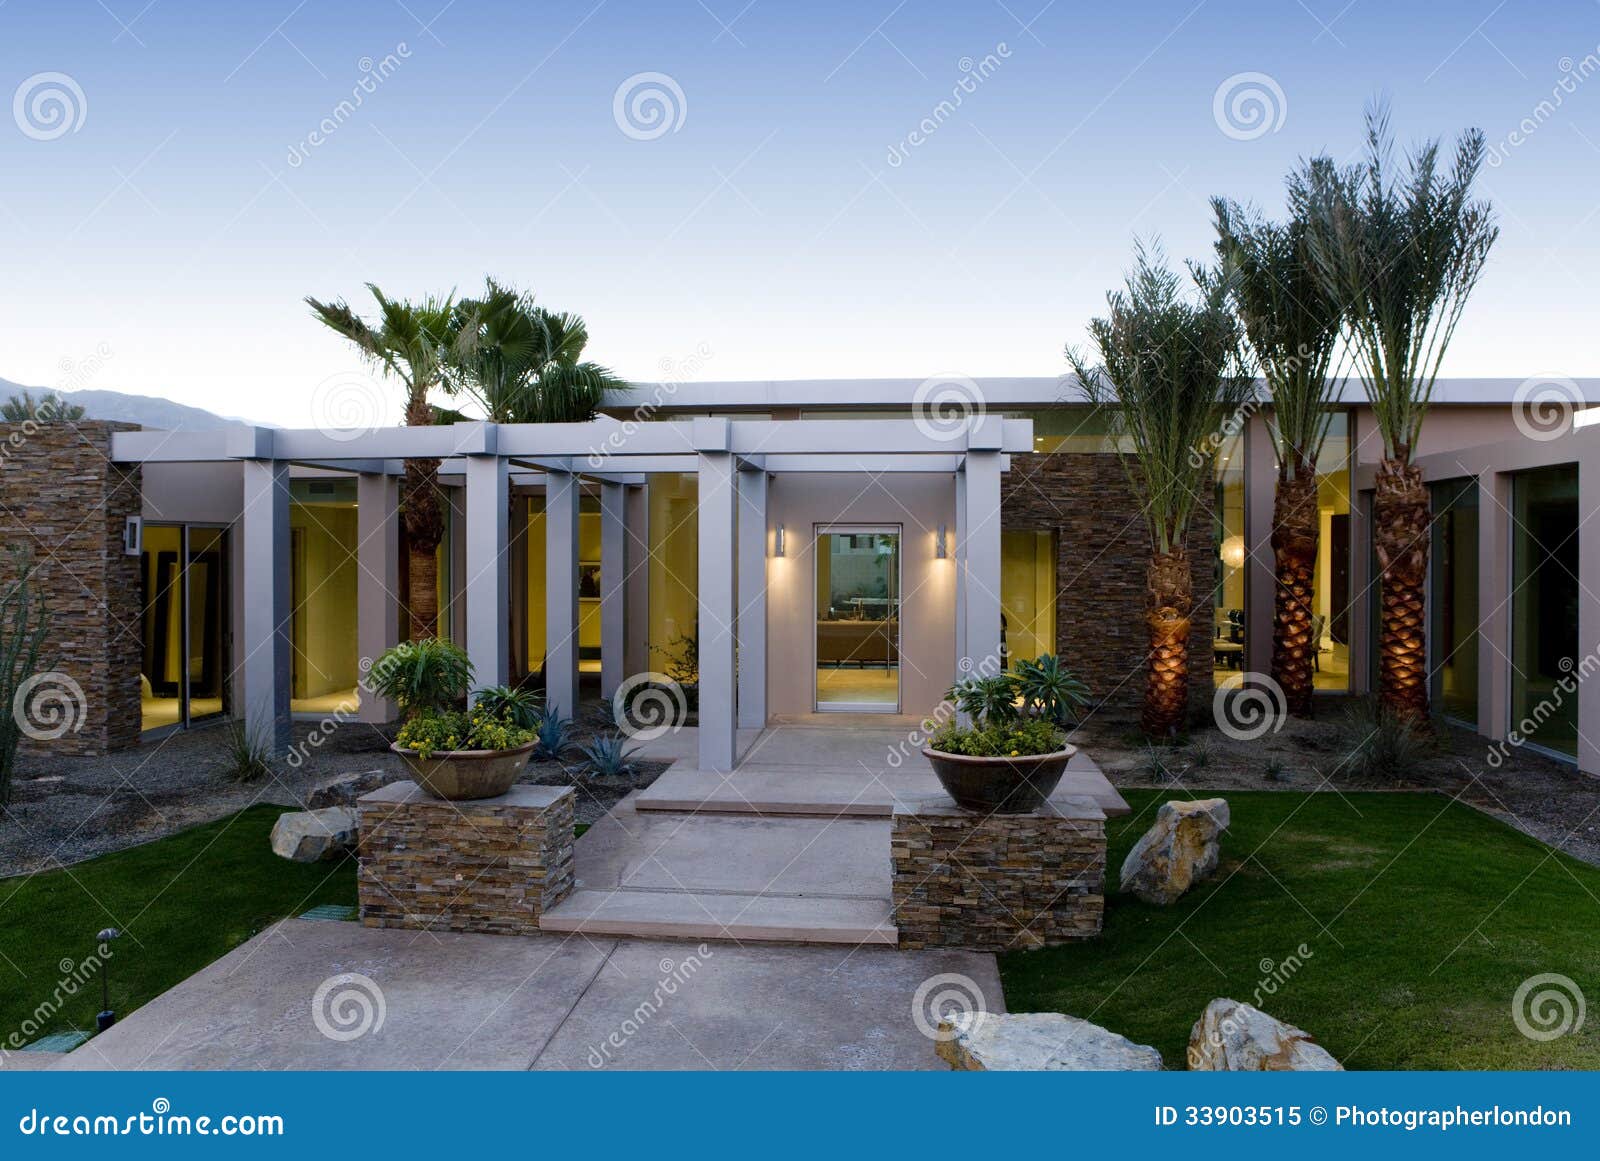 Lawn And Walkway In Front Of Modern House Royalty Free ...